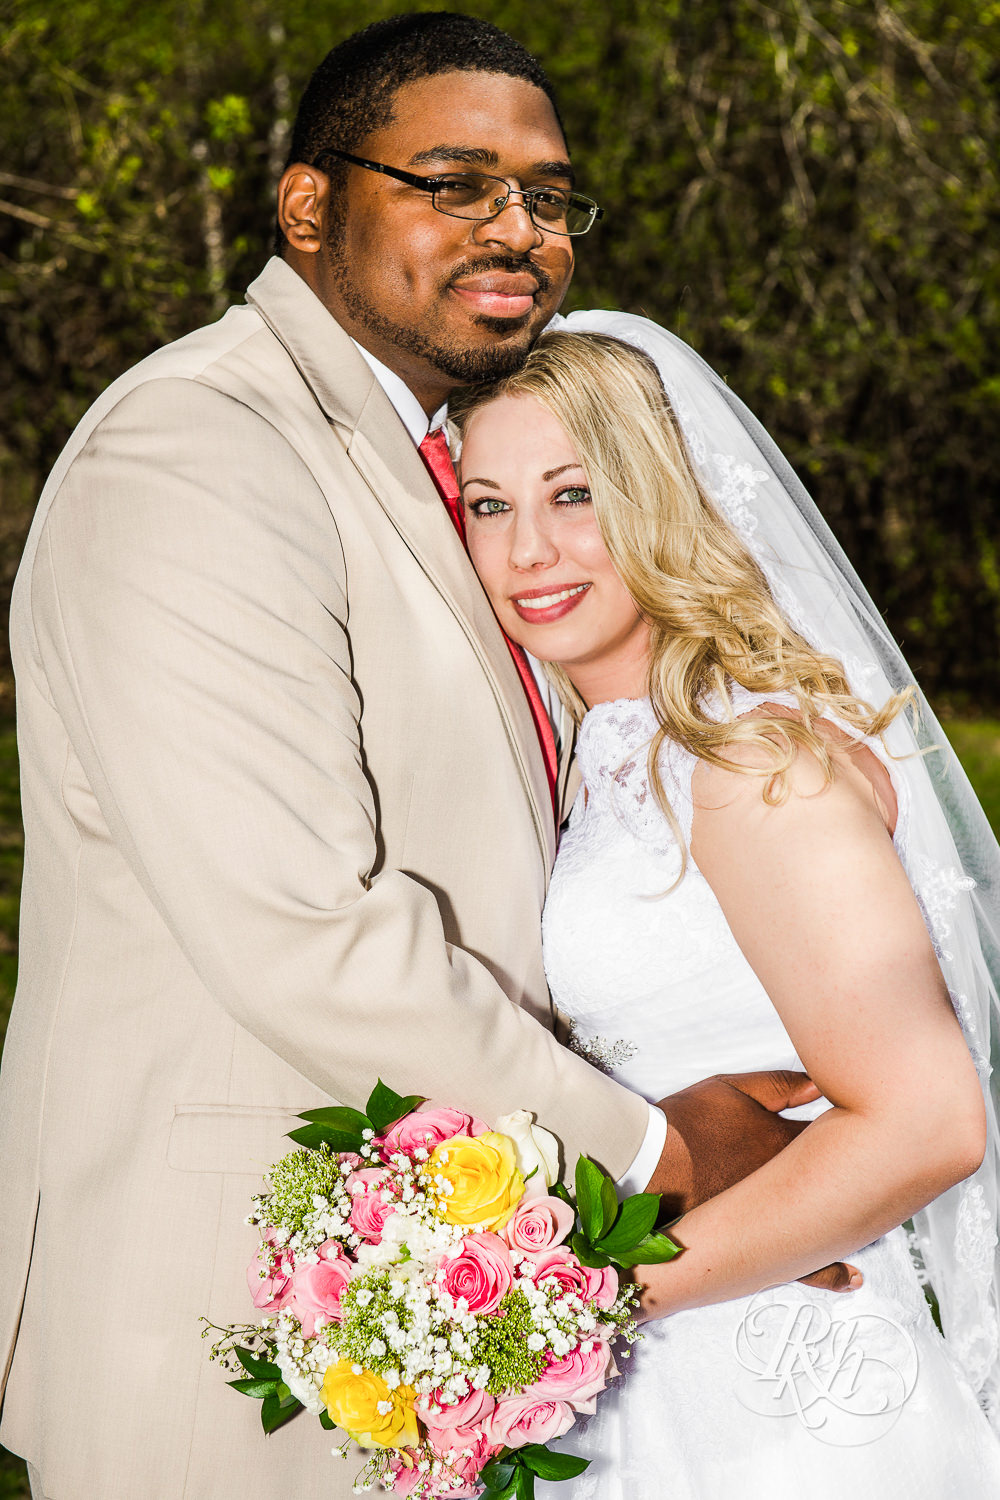 White bride and black groom smile during at North Metro Event Center wedding in Shoreview, Minnesota.